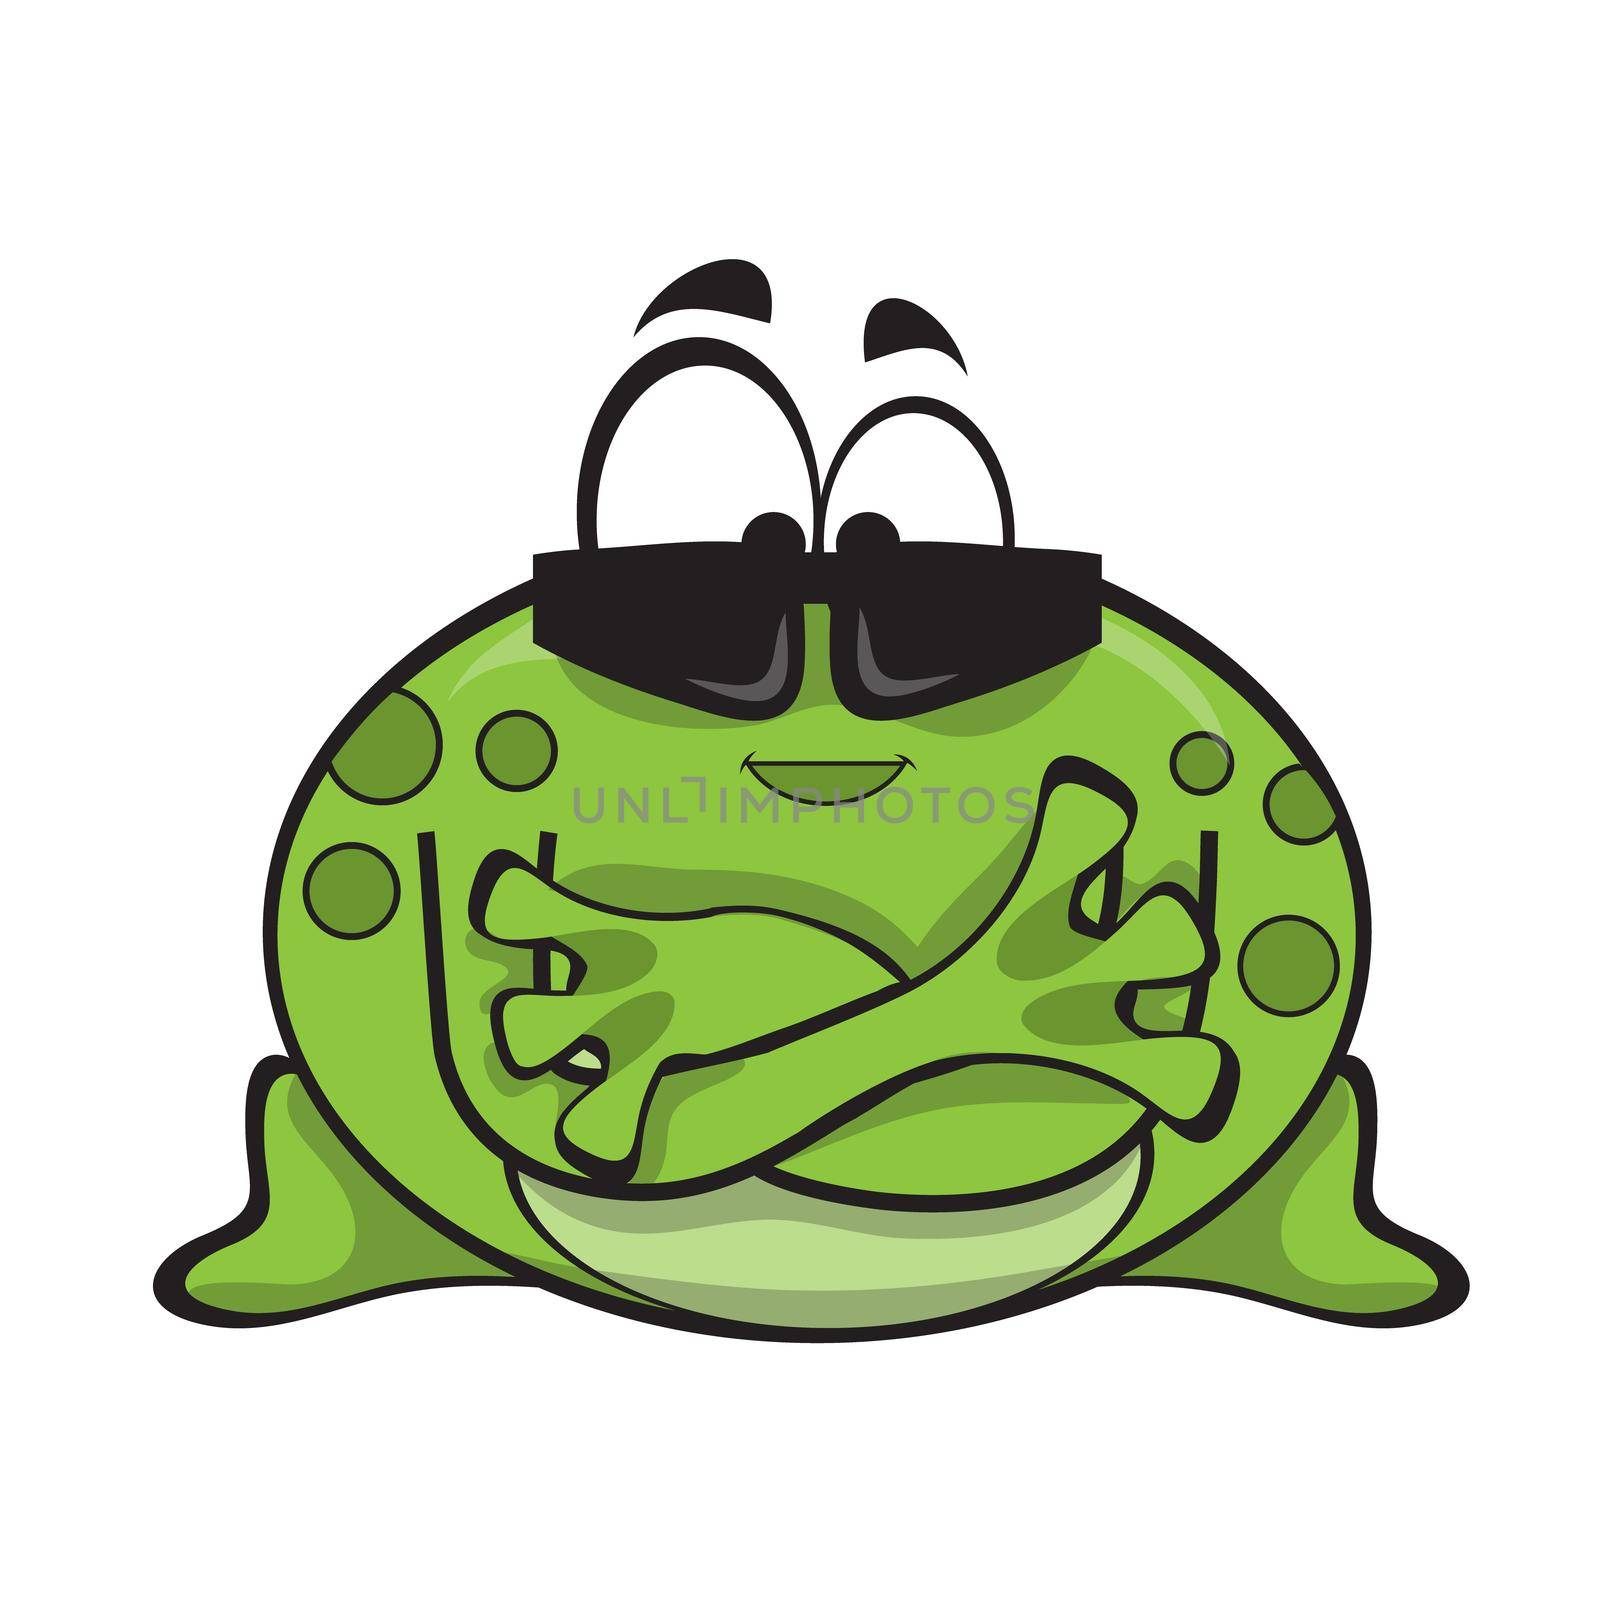 Cartoon frog character wearing sunglasses with crossed arms by natali_brill